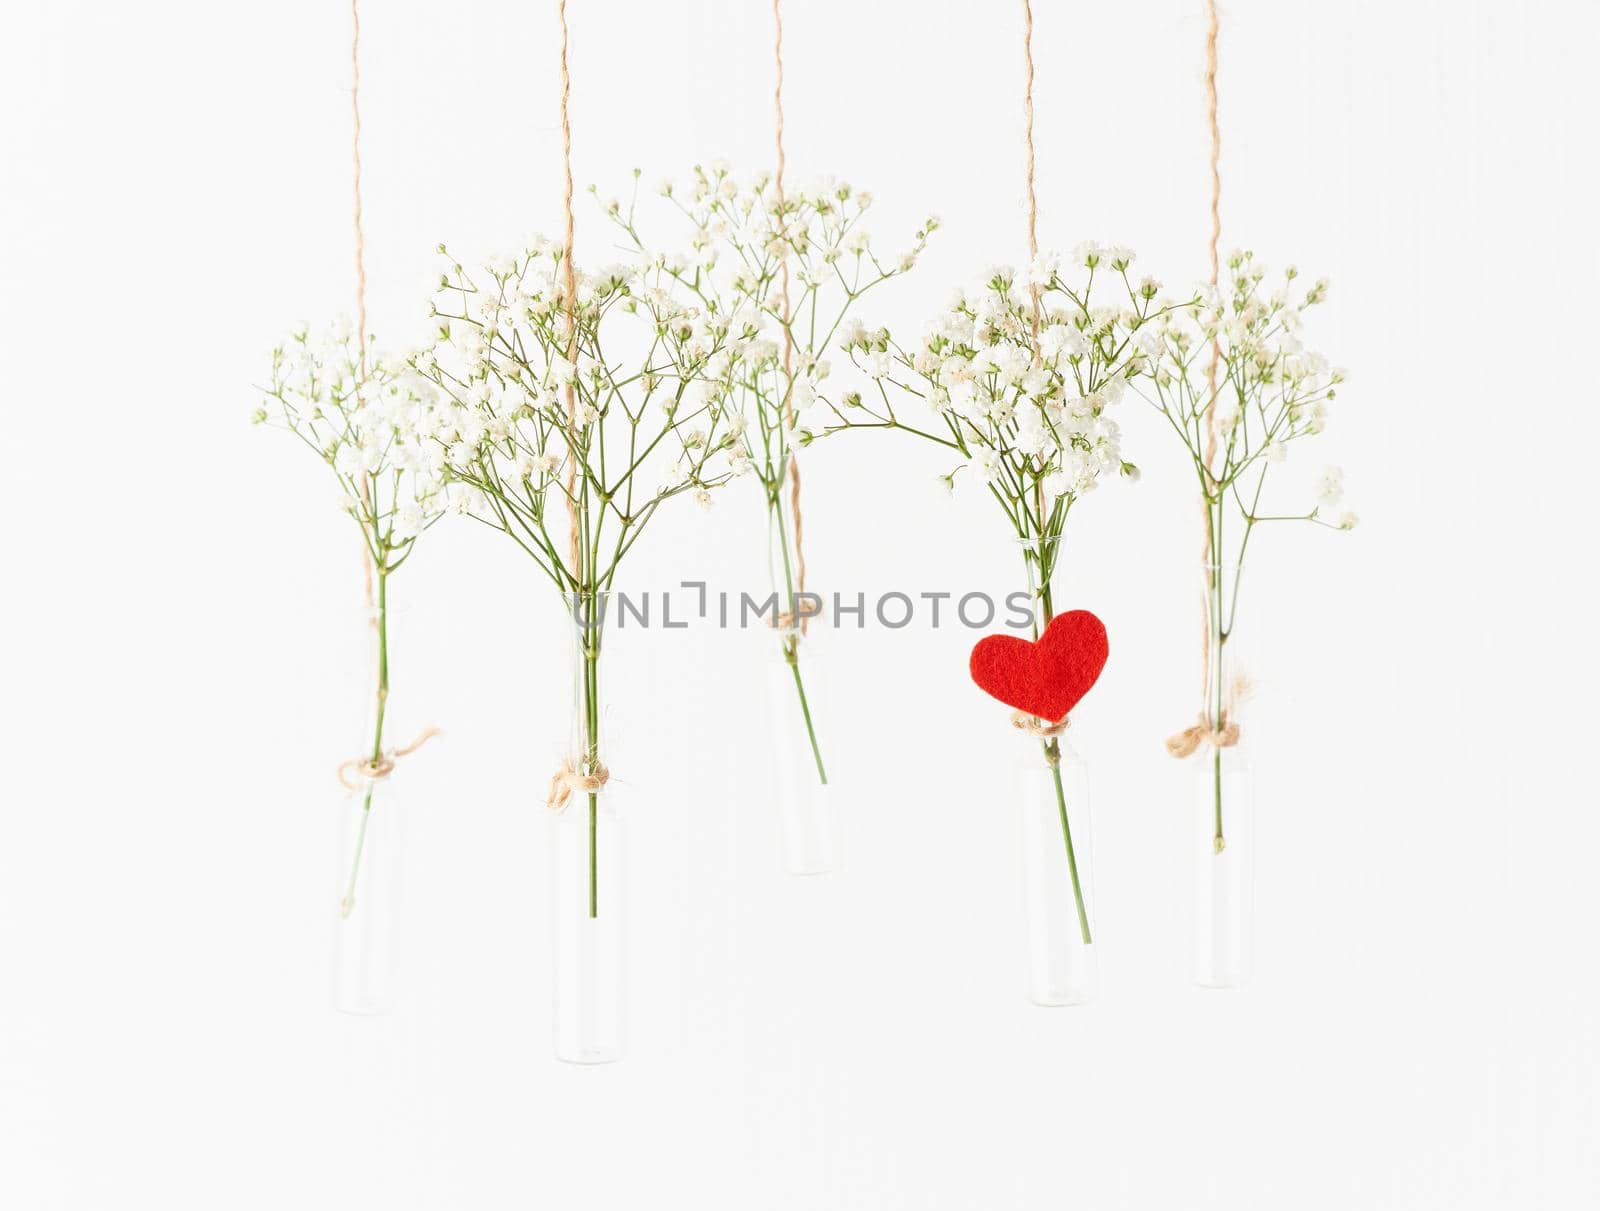 White flowers in glass mini vases hanging on white background. Red heart is symbol of love. Concept of Valentine's Day, wedding celebration. Copy space